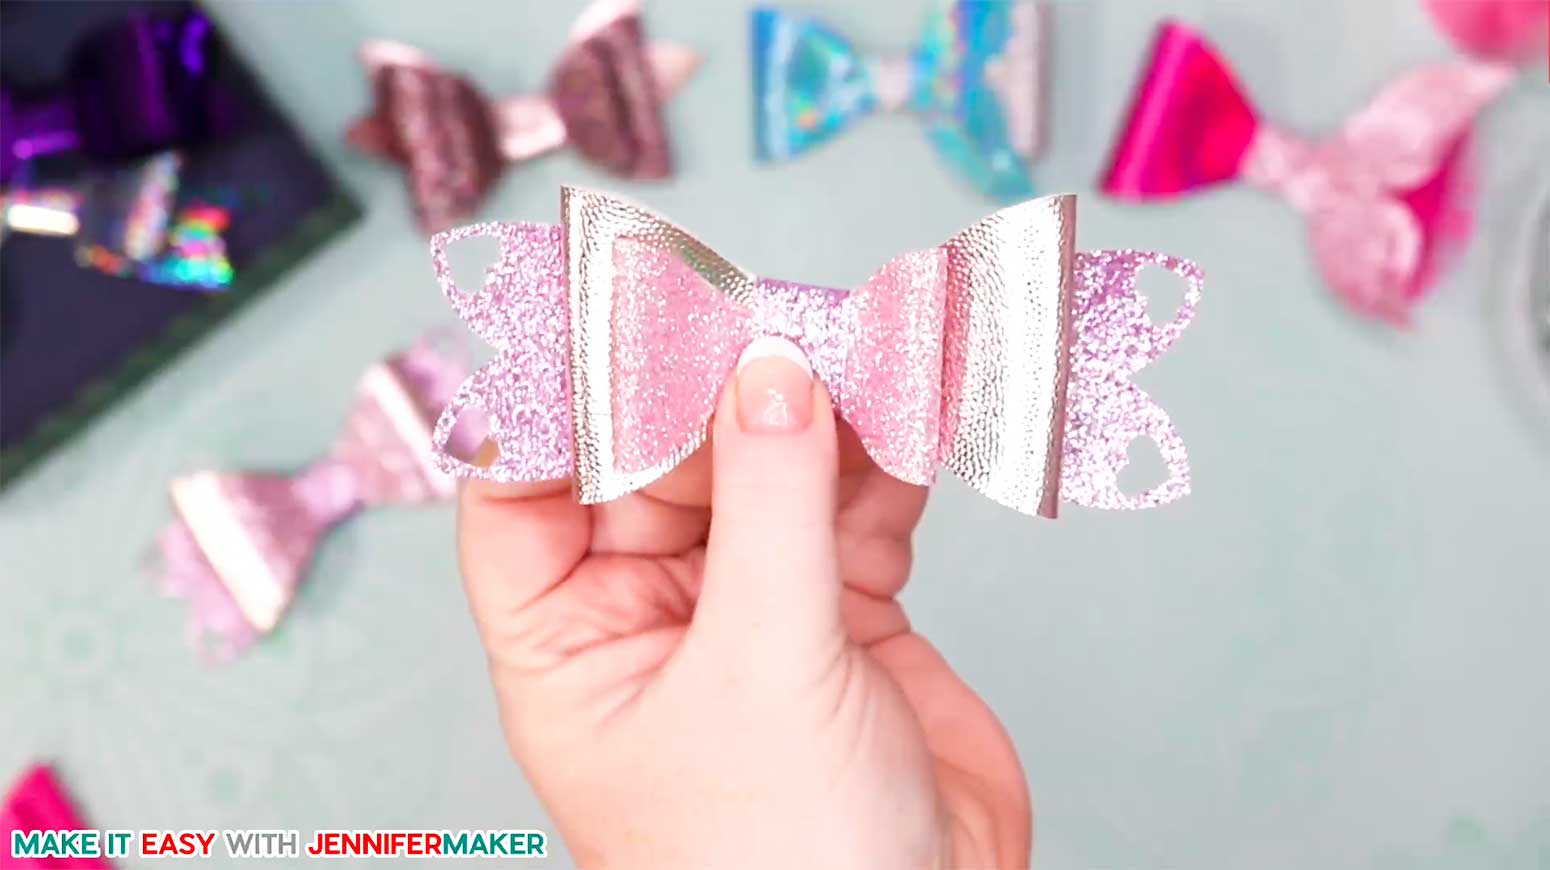 DIY hairbows peekbow butterfly template and pre cut bows- Precut bows x10 Pre cut bows and template- make your owns hairbows